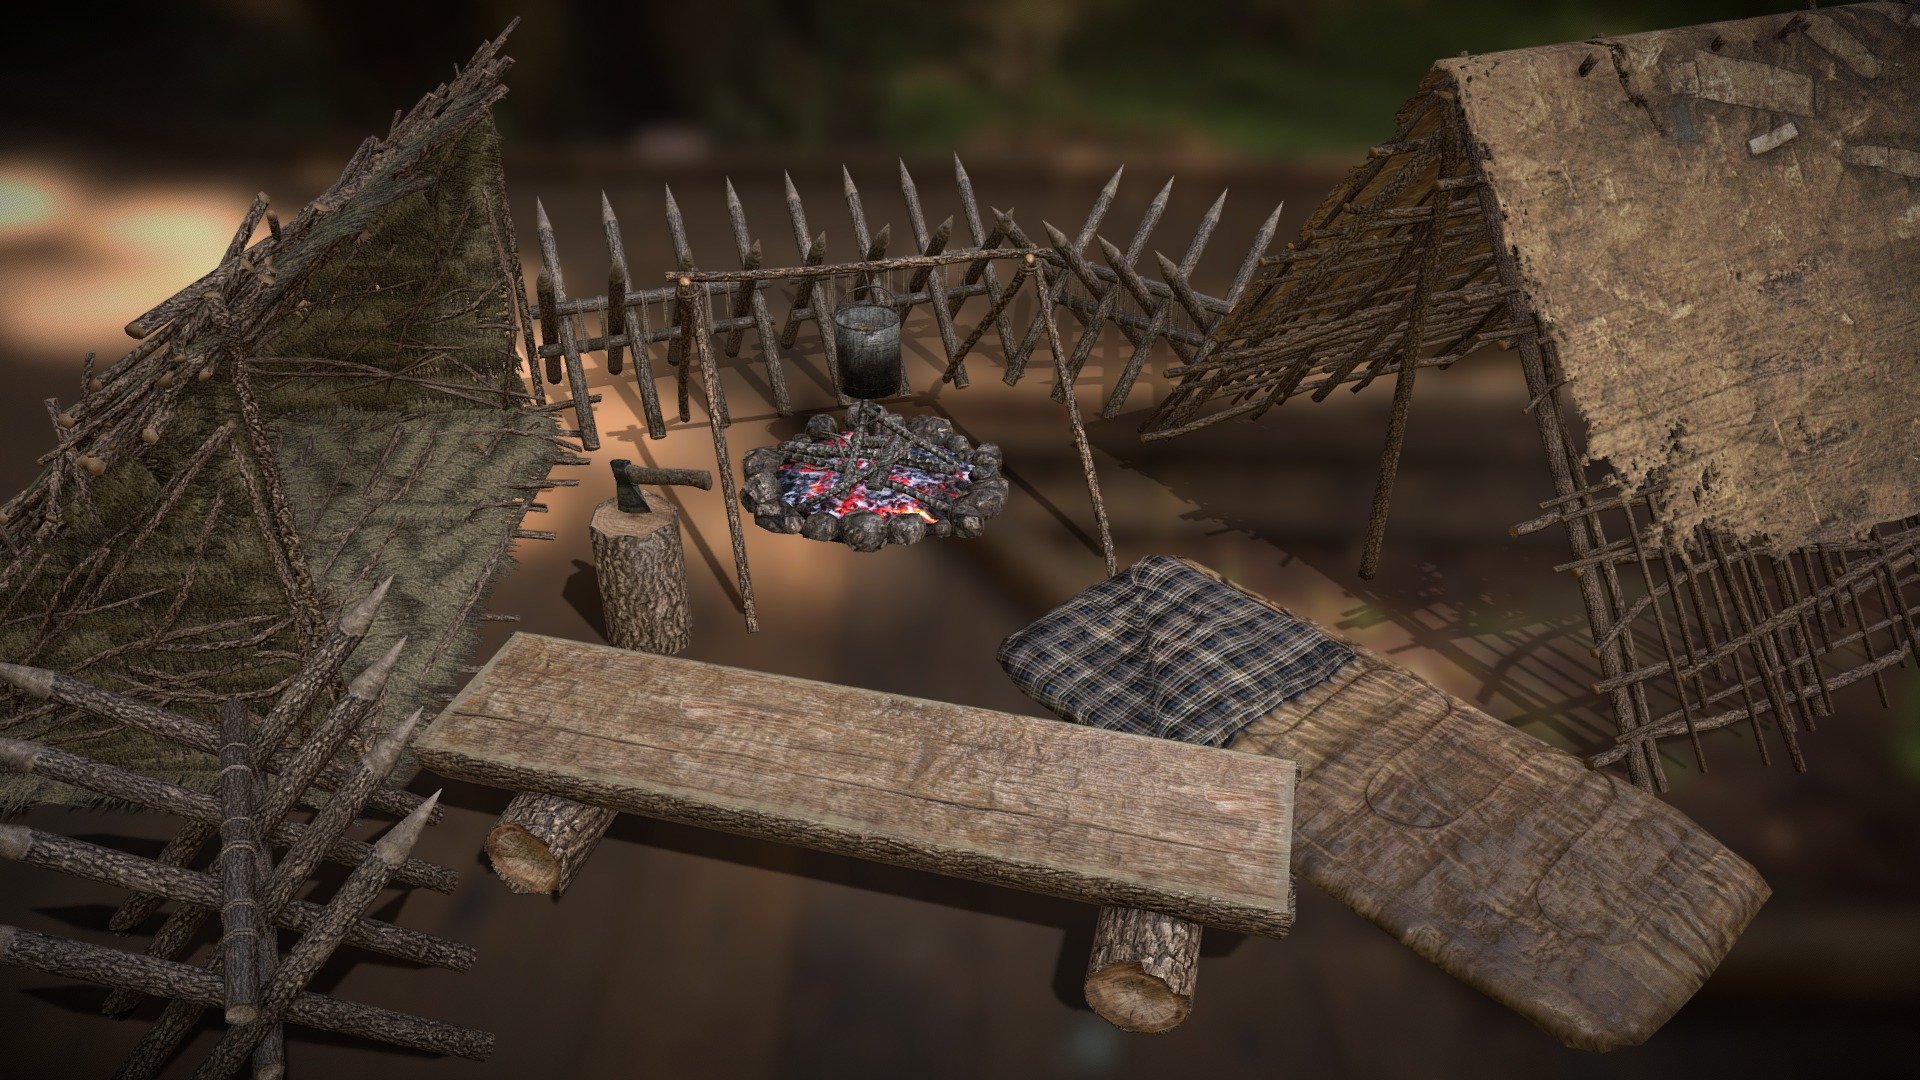 This package includes six detailed low poly 3D models, ideal for an open world environment.

Main features:




Unity 3D (.unitypackage, .prefab)

FBX models;

All 6 models contain Albedo and Normal maps

Size textures are 1024x1024 and 2048x2048 PNGs;

Package contains:




Campfire and cooking place (Support - 1128 tris, Pan - 366 tris, Campfire - 1698);

Old Wooden Shelter (7861 tris);

Hatchet (588 tris);

Sleeping Bag (452 tris);

Wood Tree Bench (740 tris);

Log (94 tris);

Create stunning environments using these assets for your own game.

Contact:
mr.rusel1999@mail.ru - Camping Pack v1.1 - 3D model by ANRUVAL_3D_MODELS 3d model